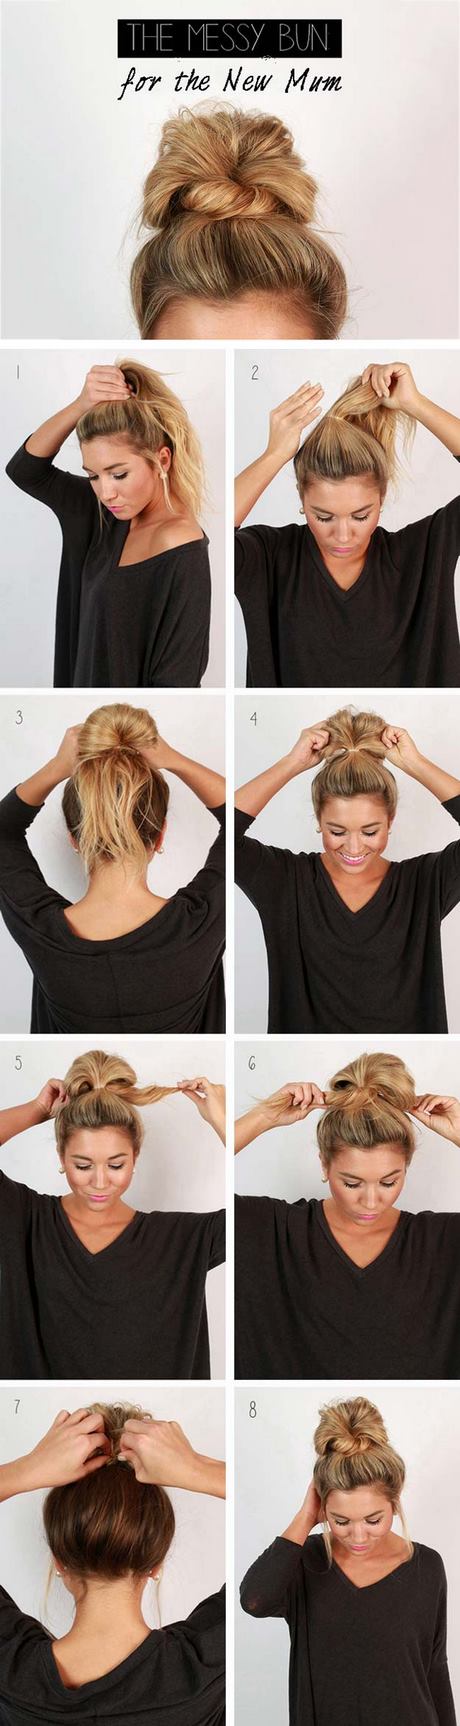 quick-and-easy-hairstyles-for-beginners-06_16 Quick and easy hairstyles for beginners